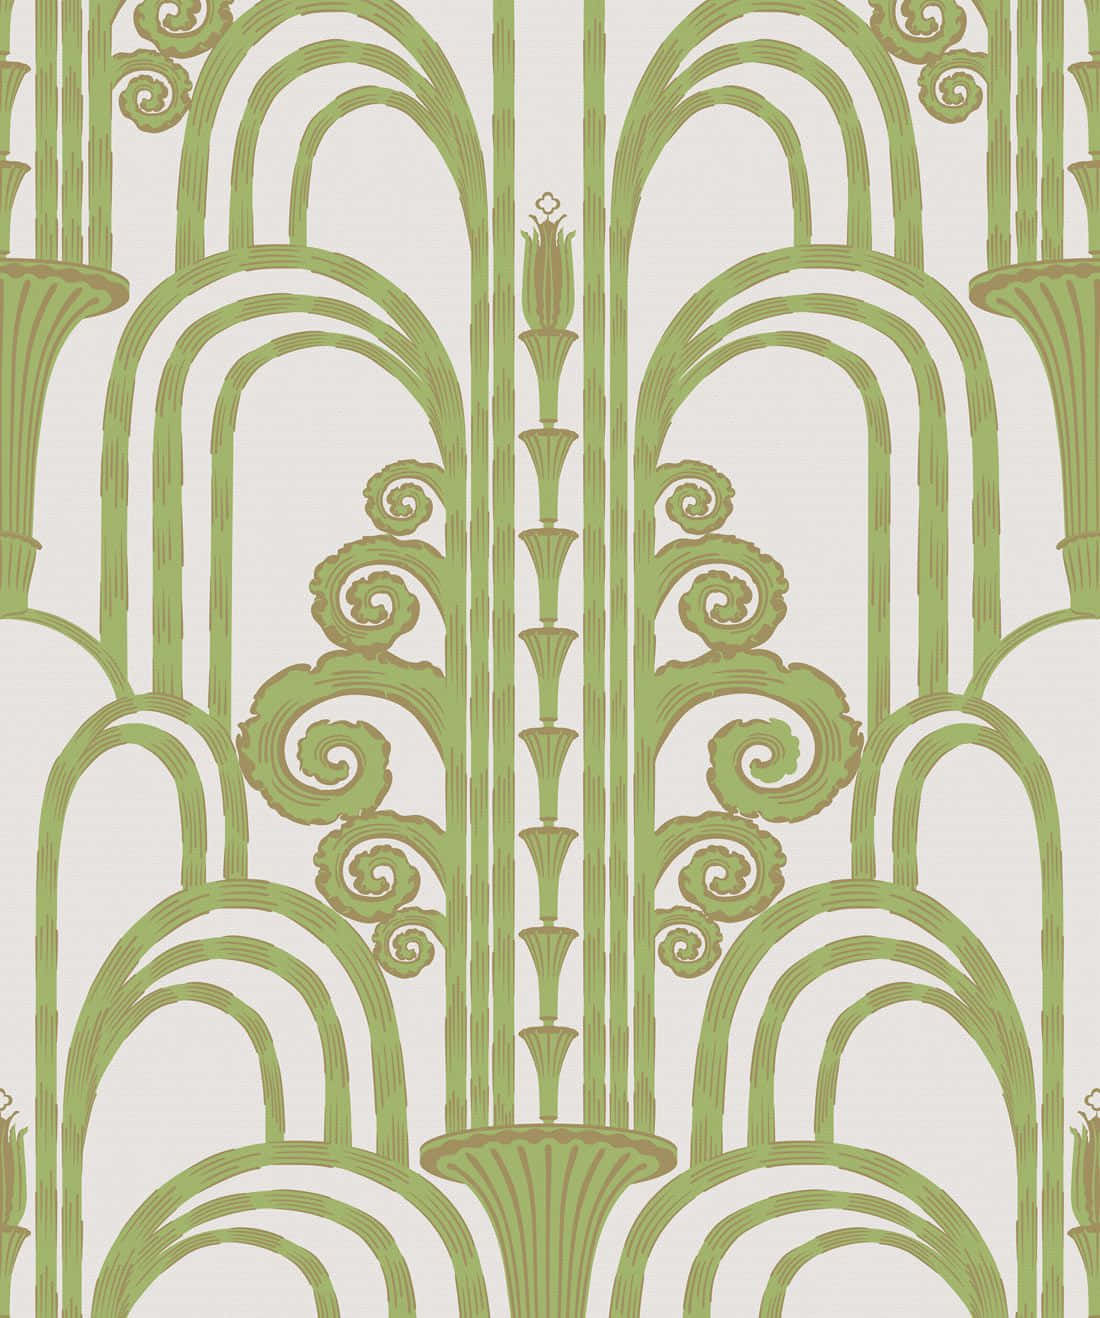 Stylize Your Life with an Art Deco iPhone Wallpaper